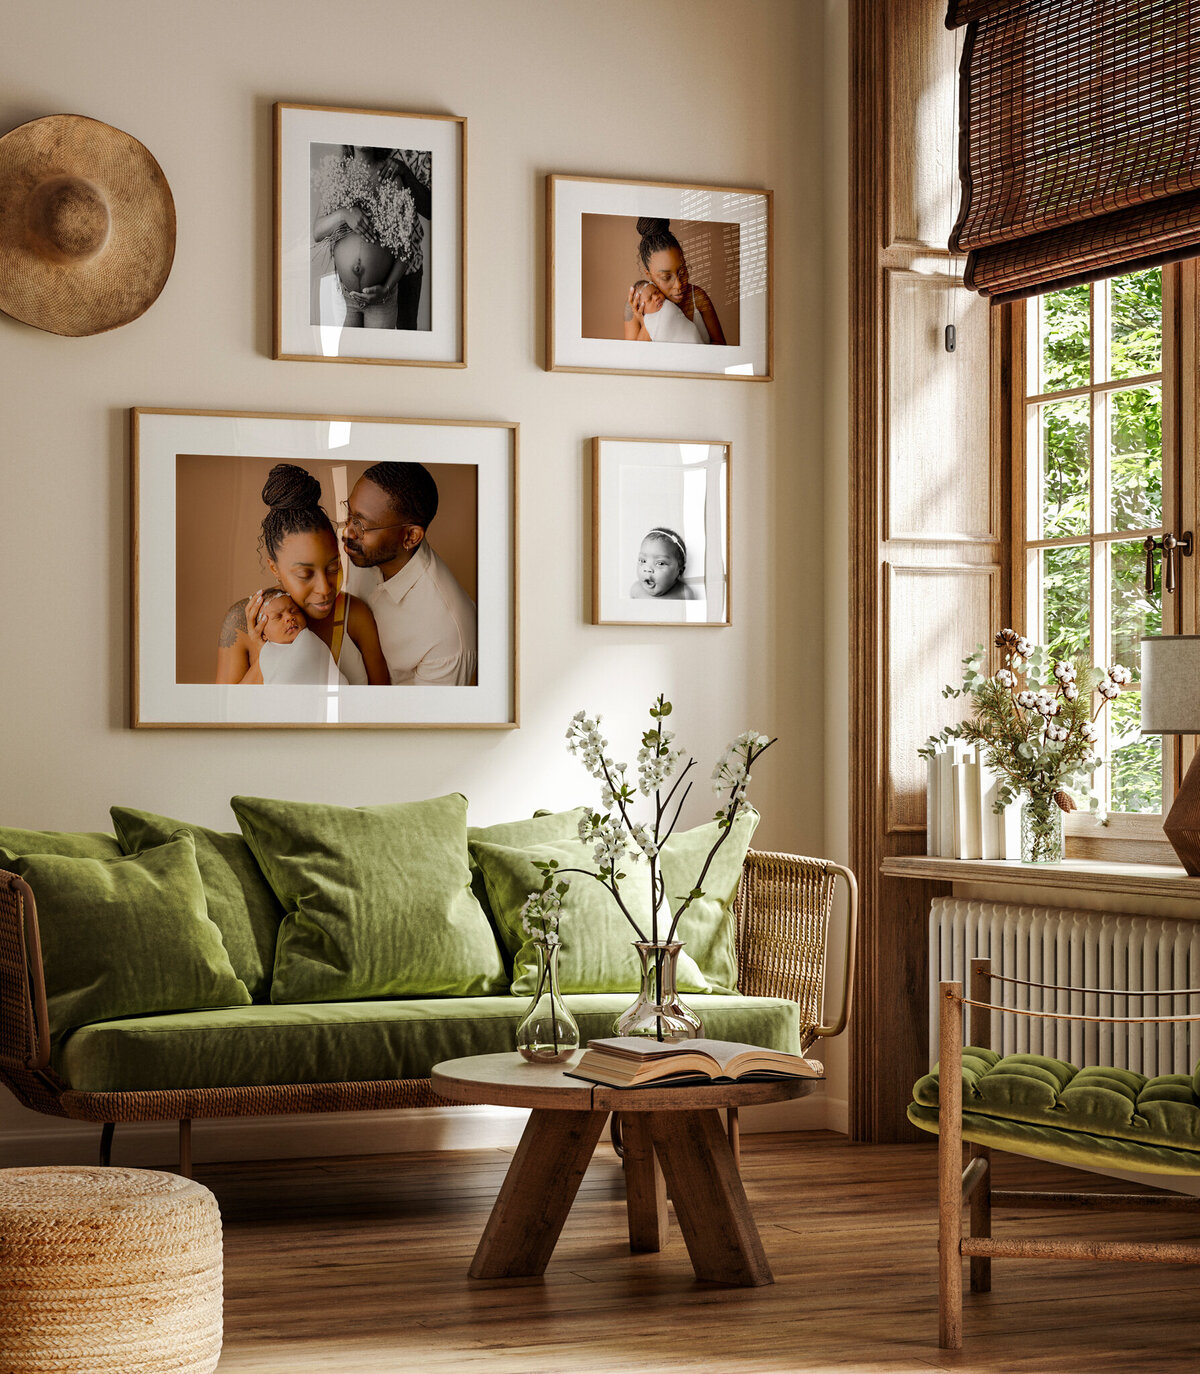 newborn portraits framed and displayed throughout a home